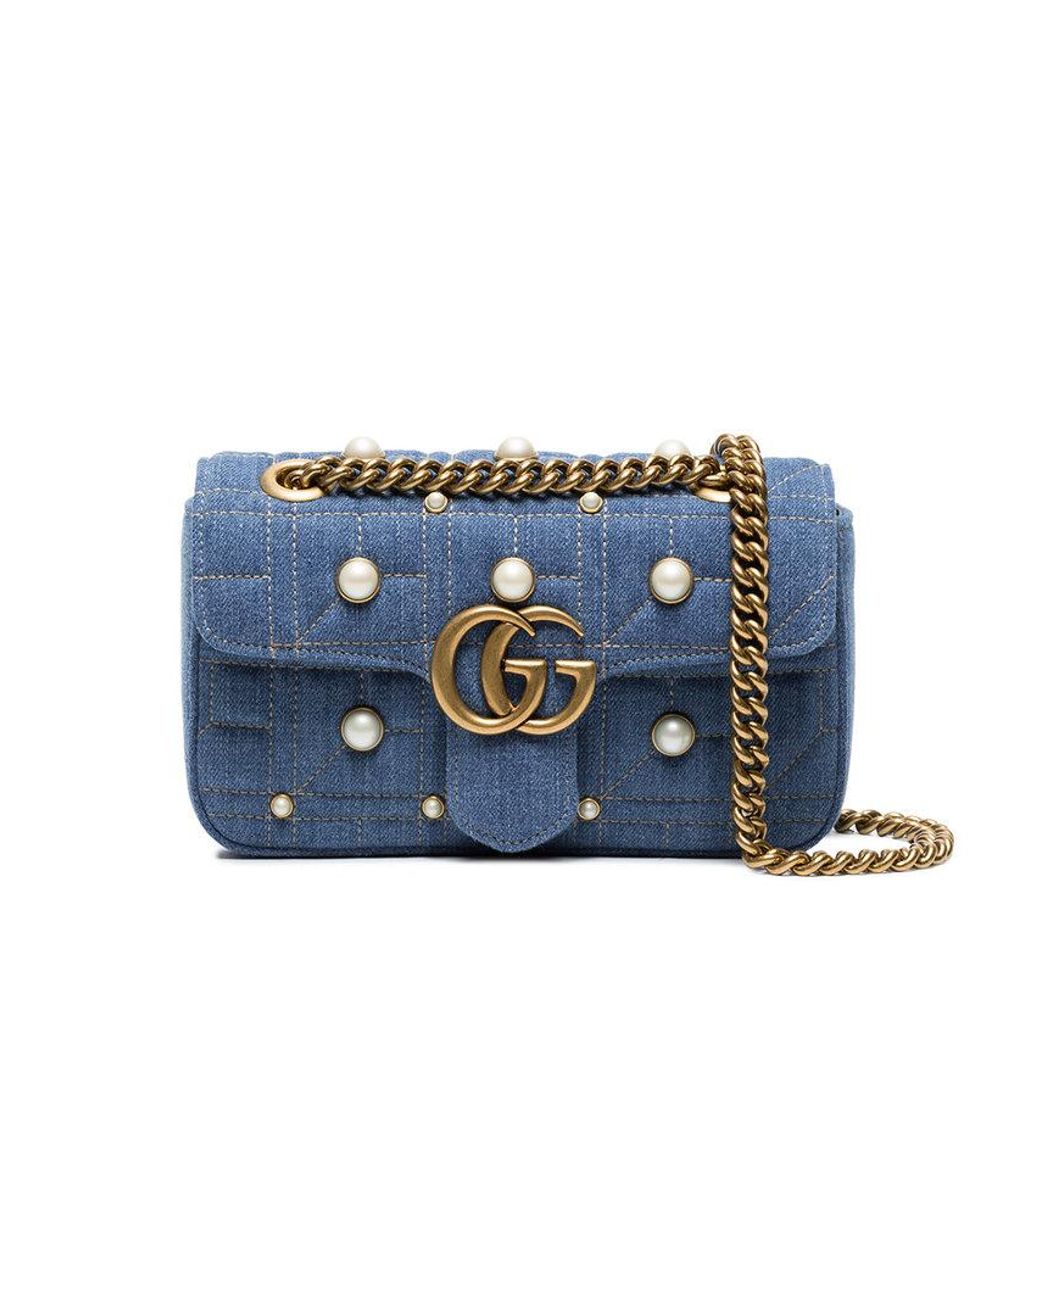 GUCCI Ophidia small leather-trimmed denim-jacquard camera bag | Bags, Gucci,  Leather